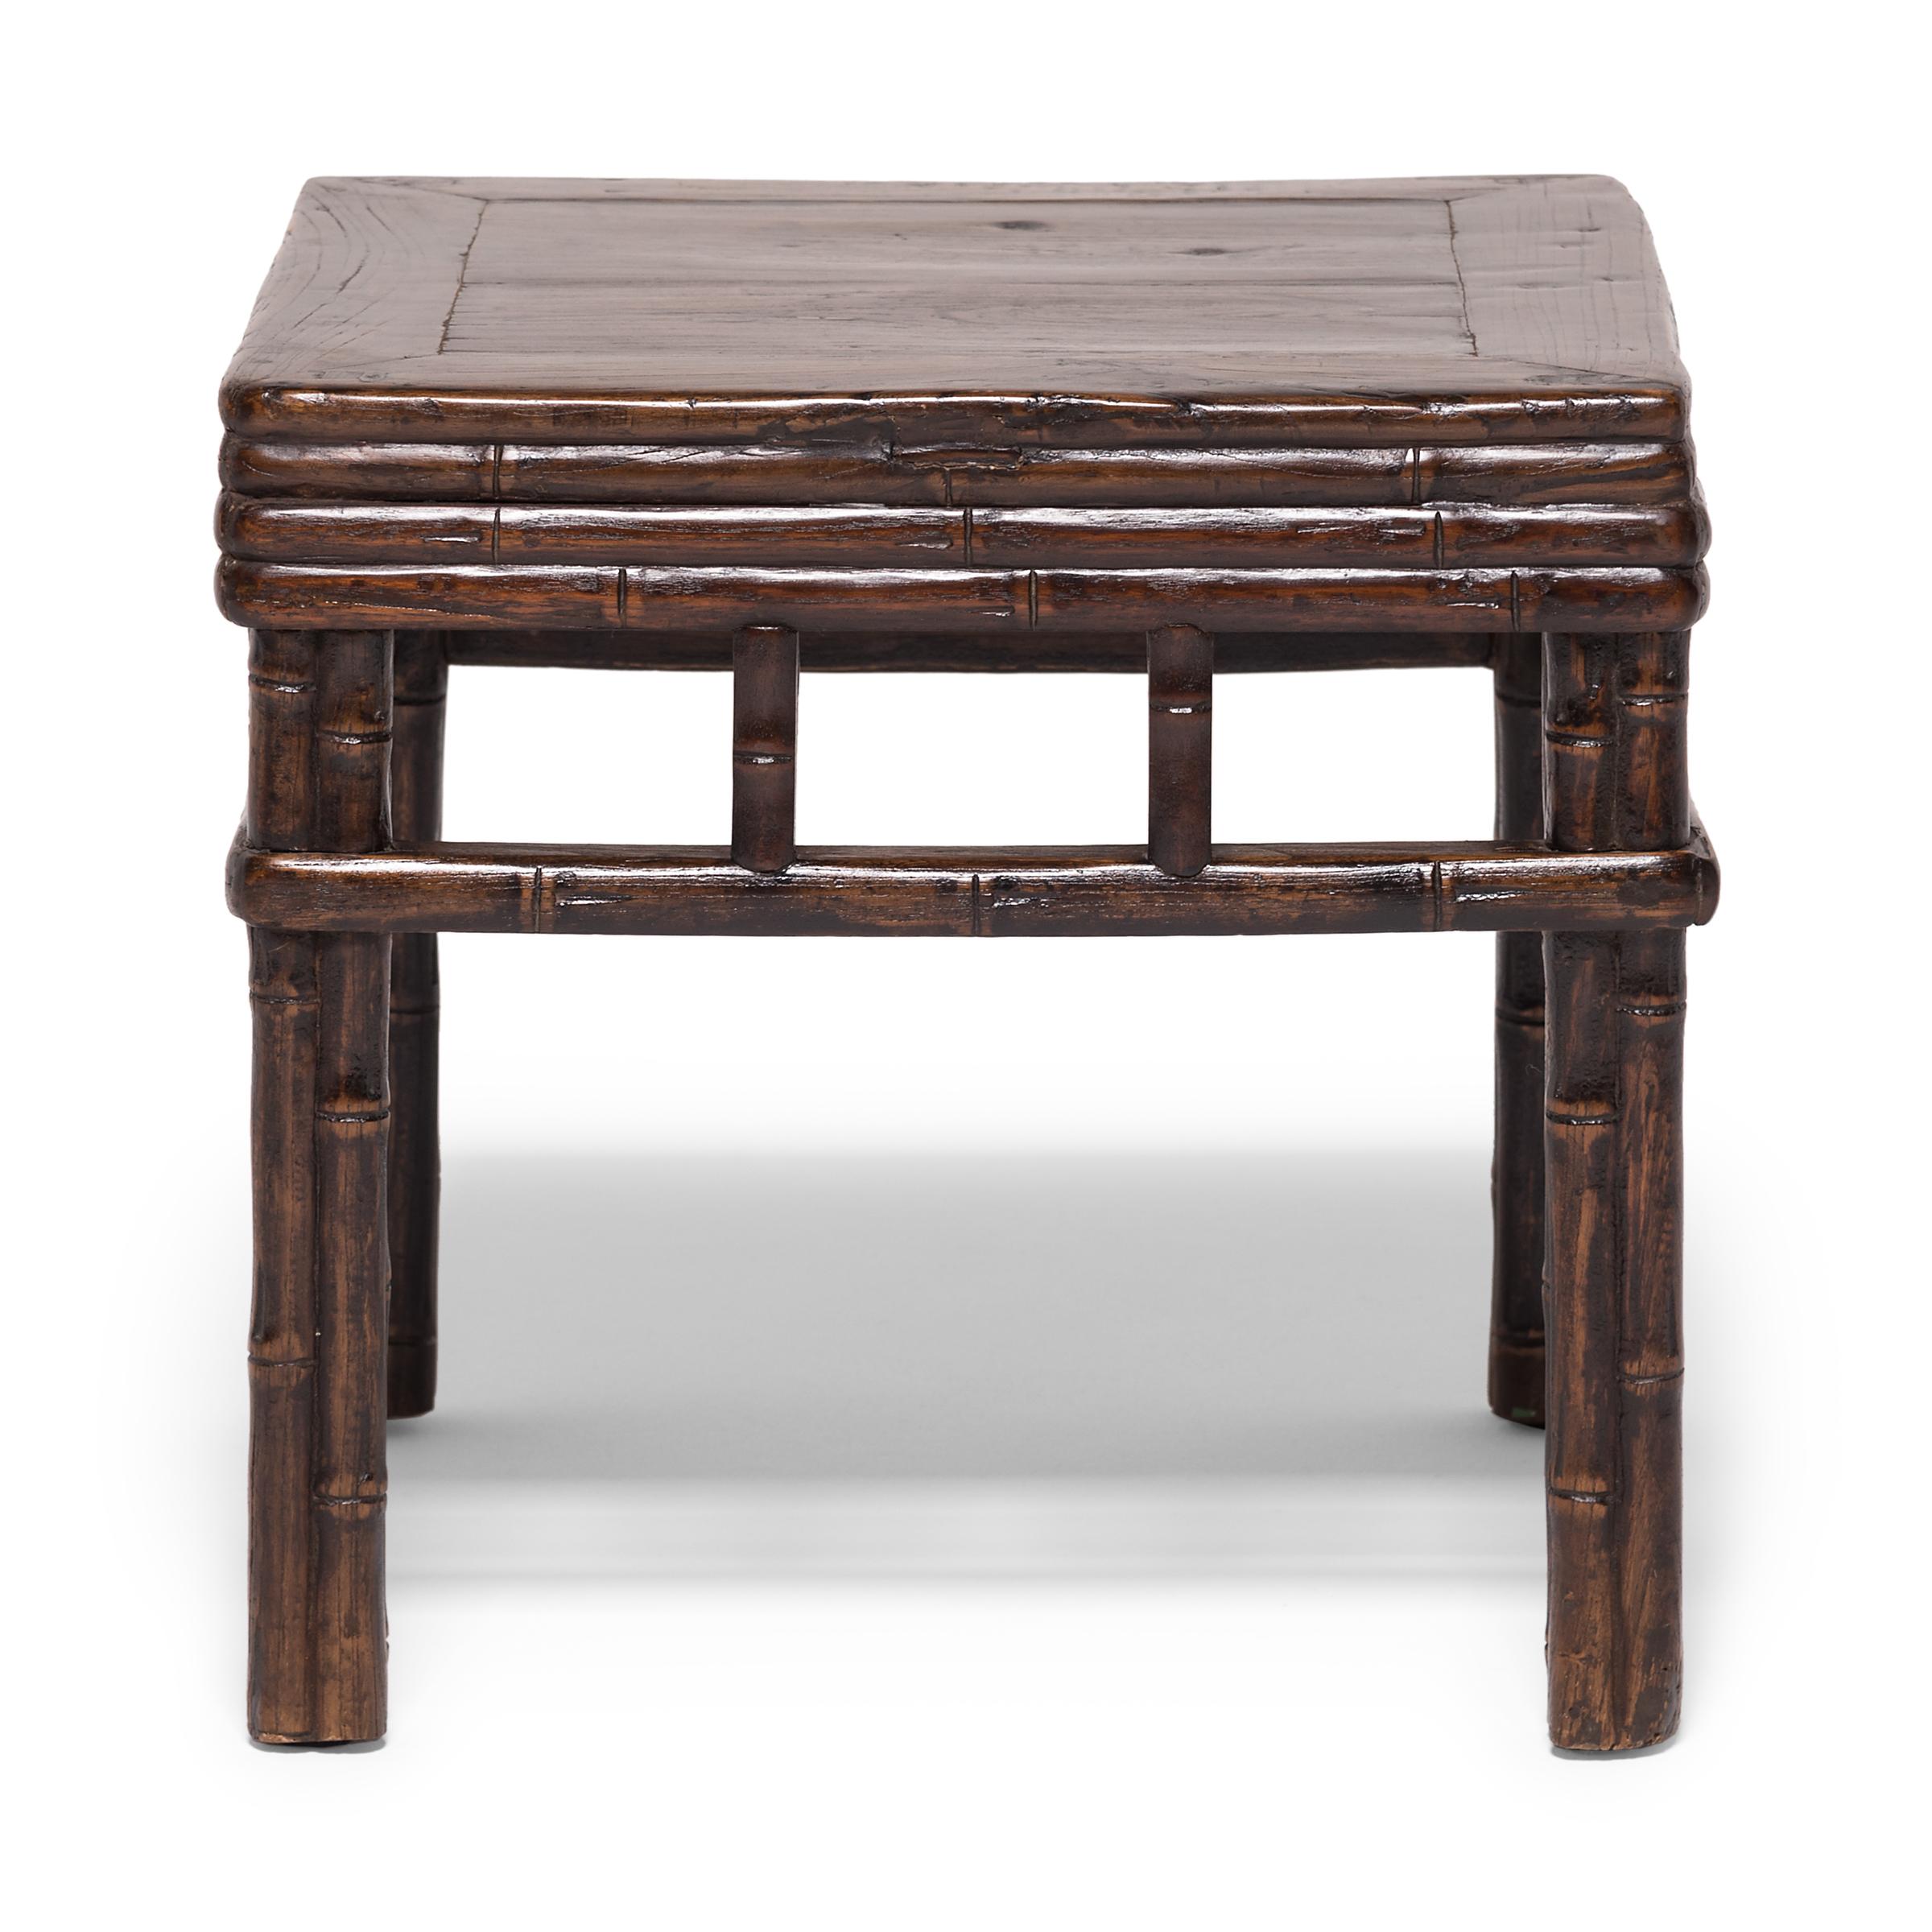 In 18th and 19th century China, bamboo was favored as a construction material and as a motif, representing humility and the Taoist values of naturalism. Though bamboo furniture was comfortable, it was not as luxurious as fine wood furniture. With